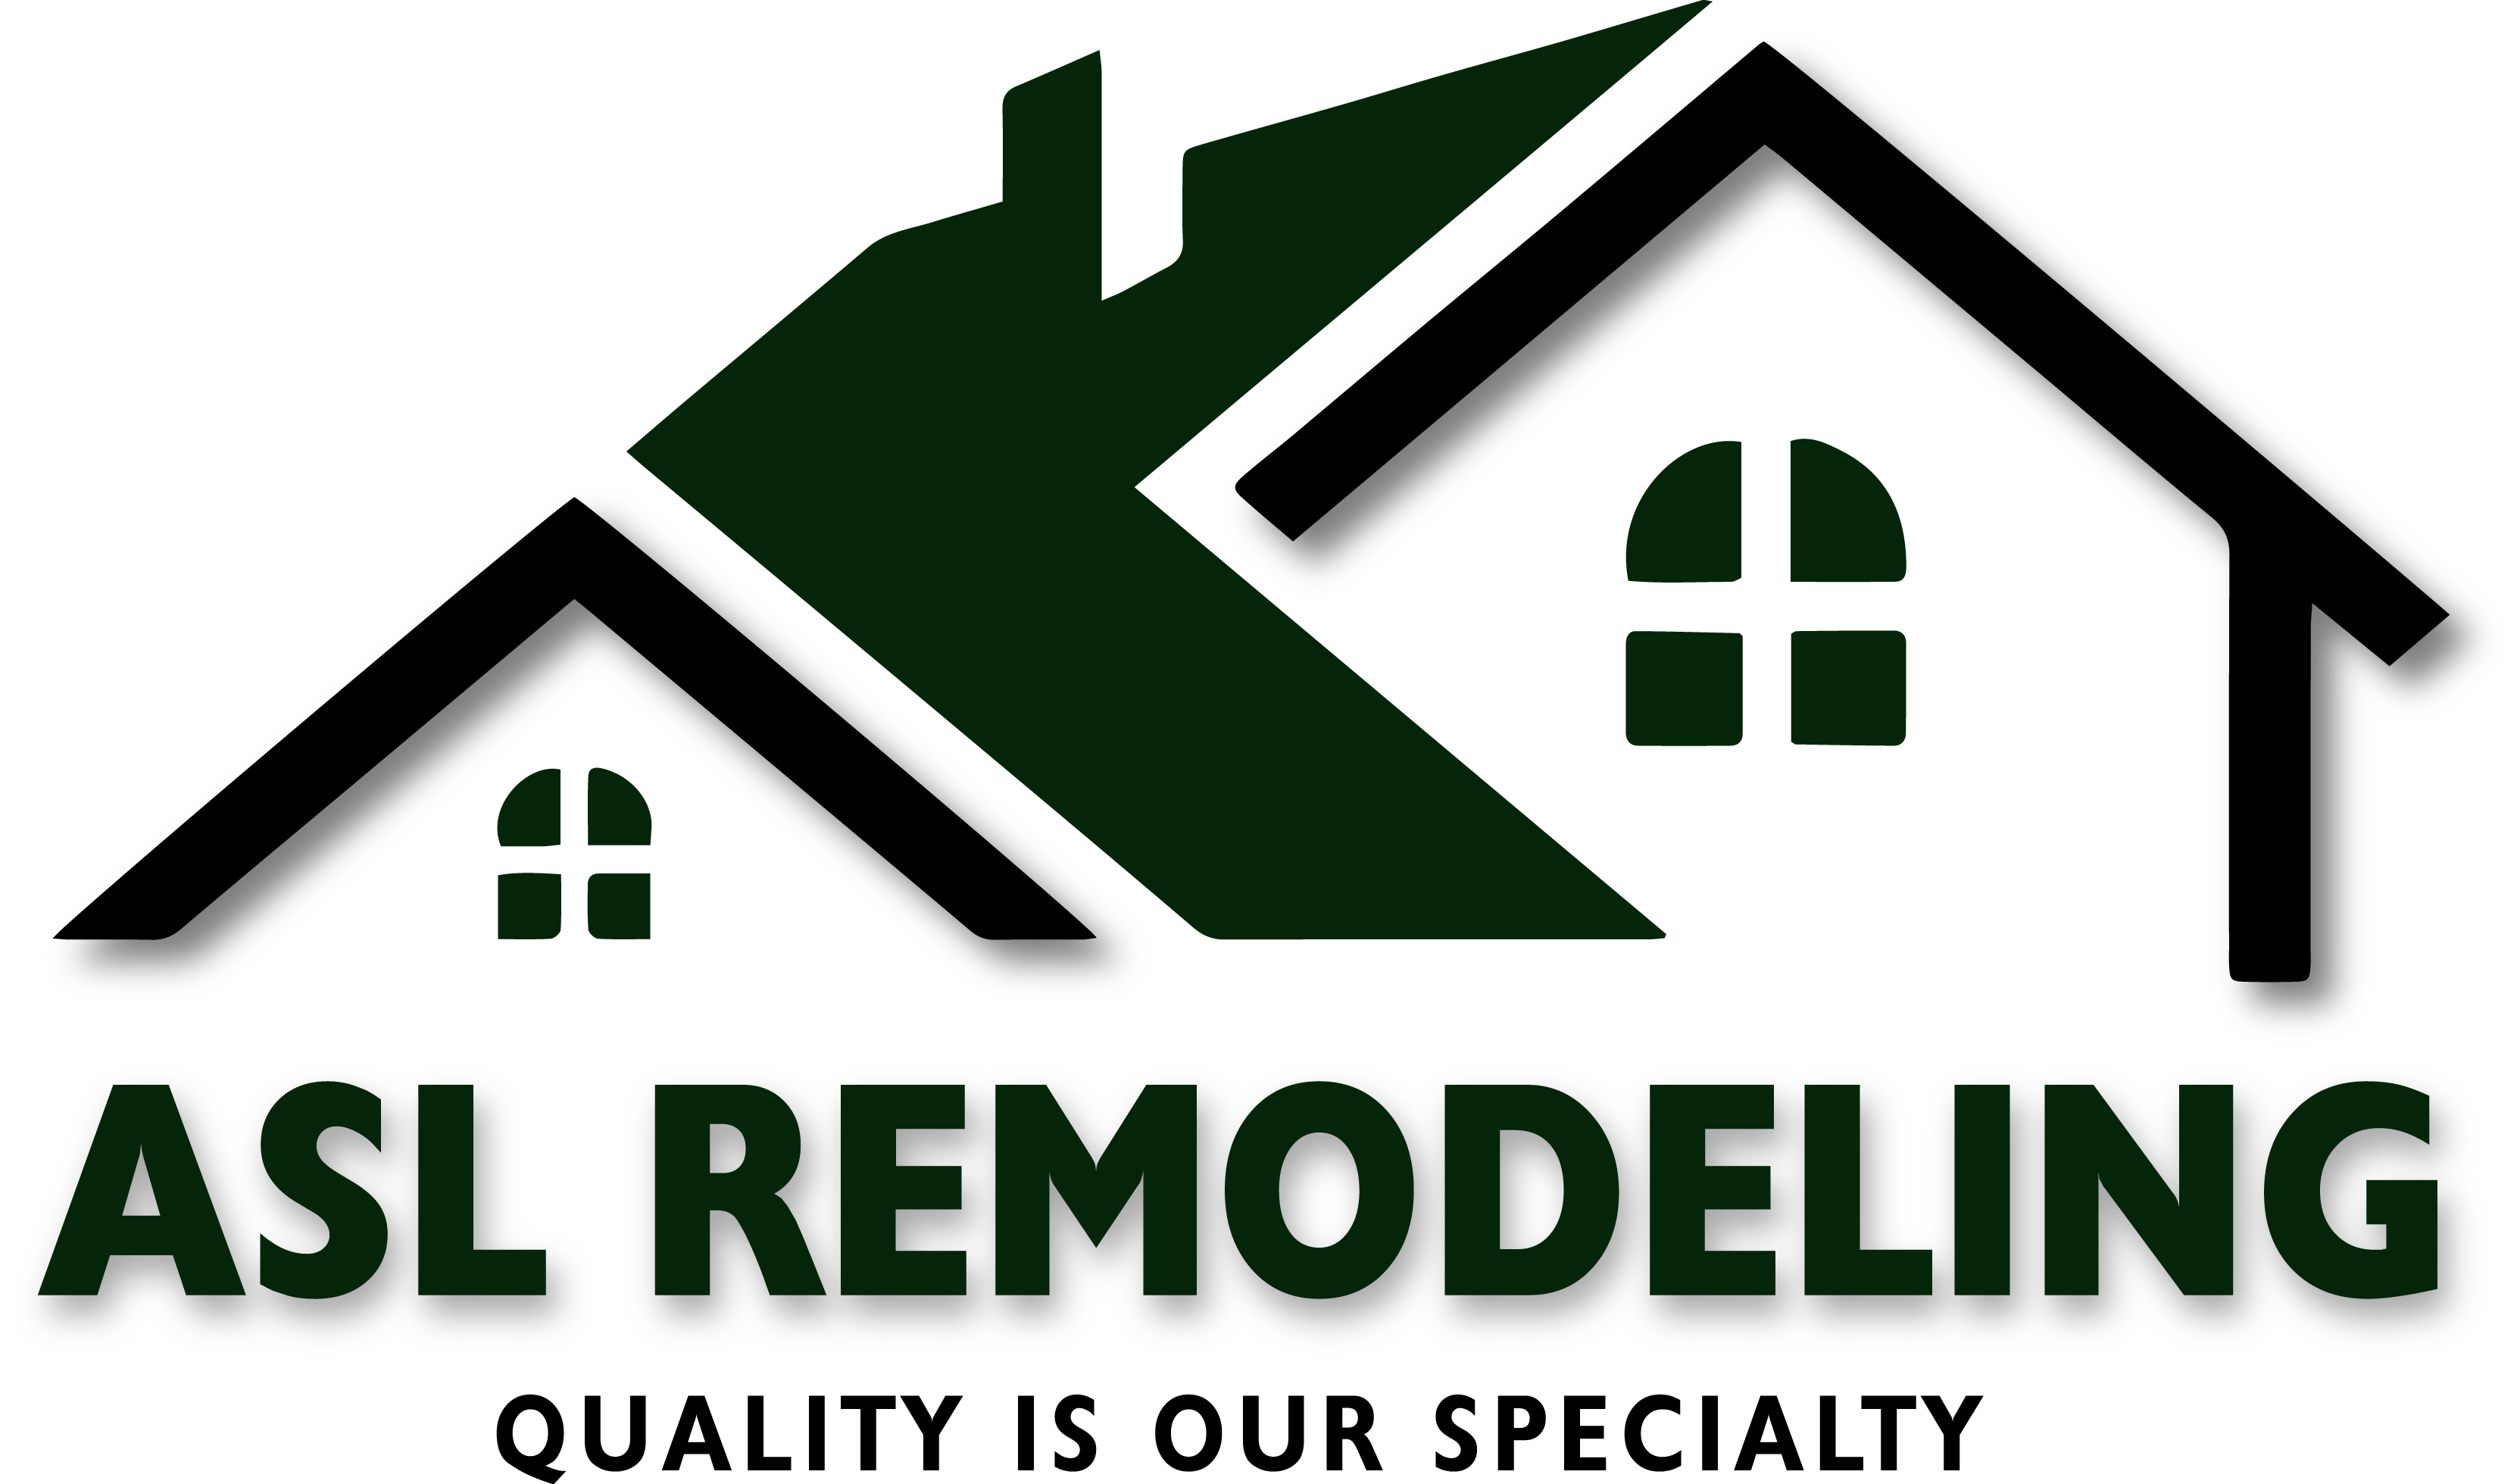 ASL Remodeling Construction Company in the Bay Area Gives the Best Service for a Kitchen Remodel